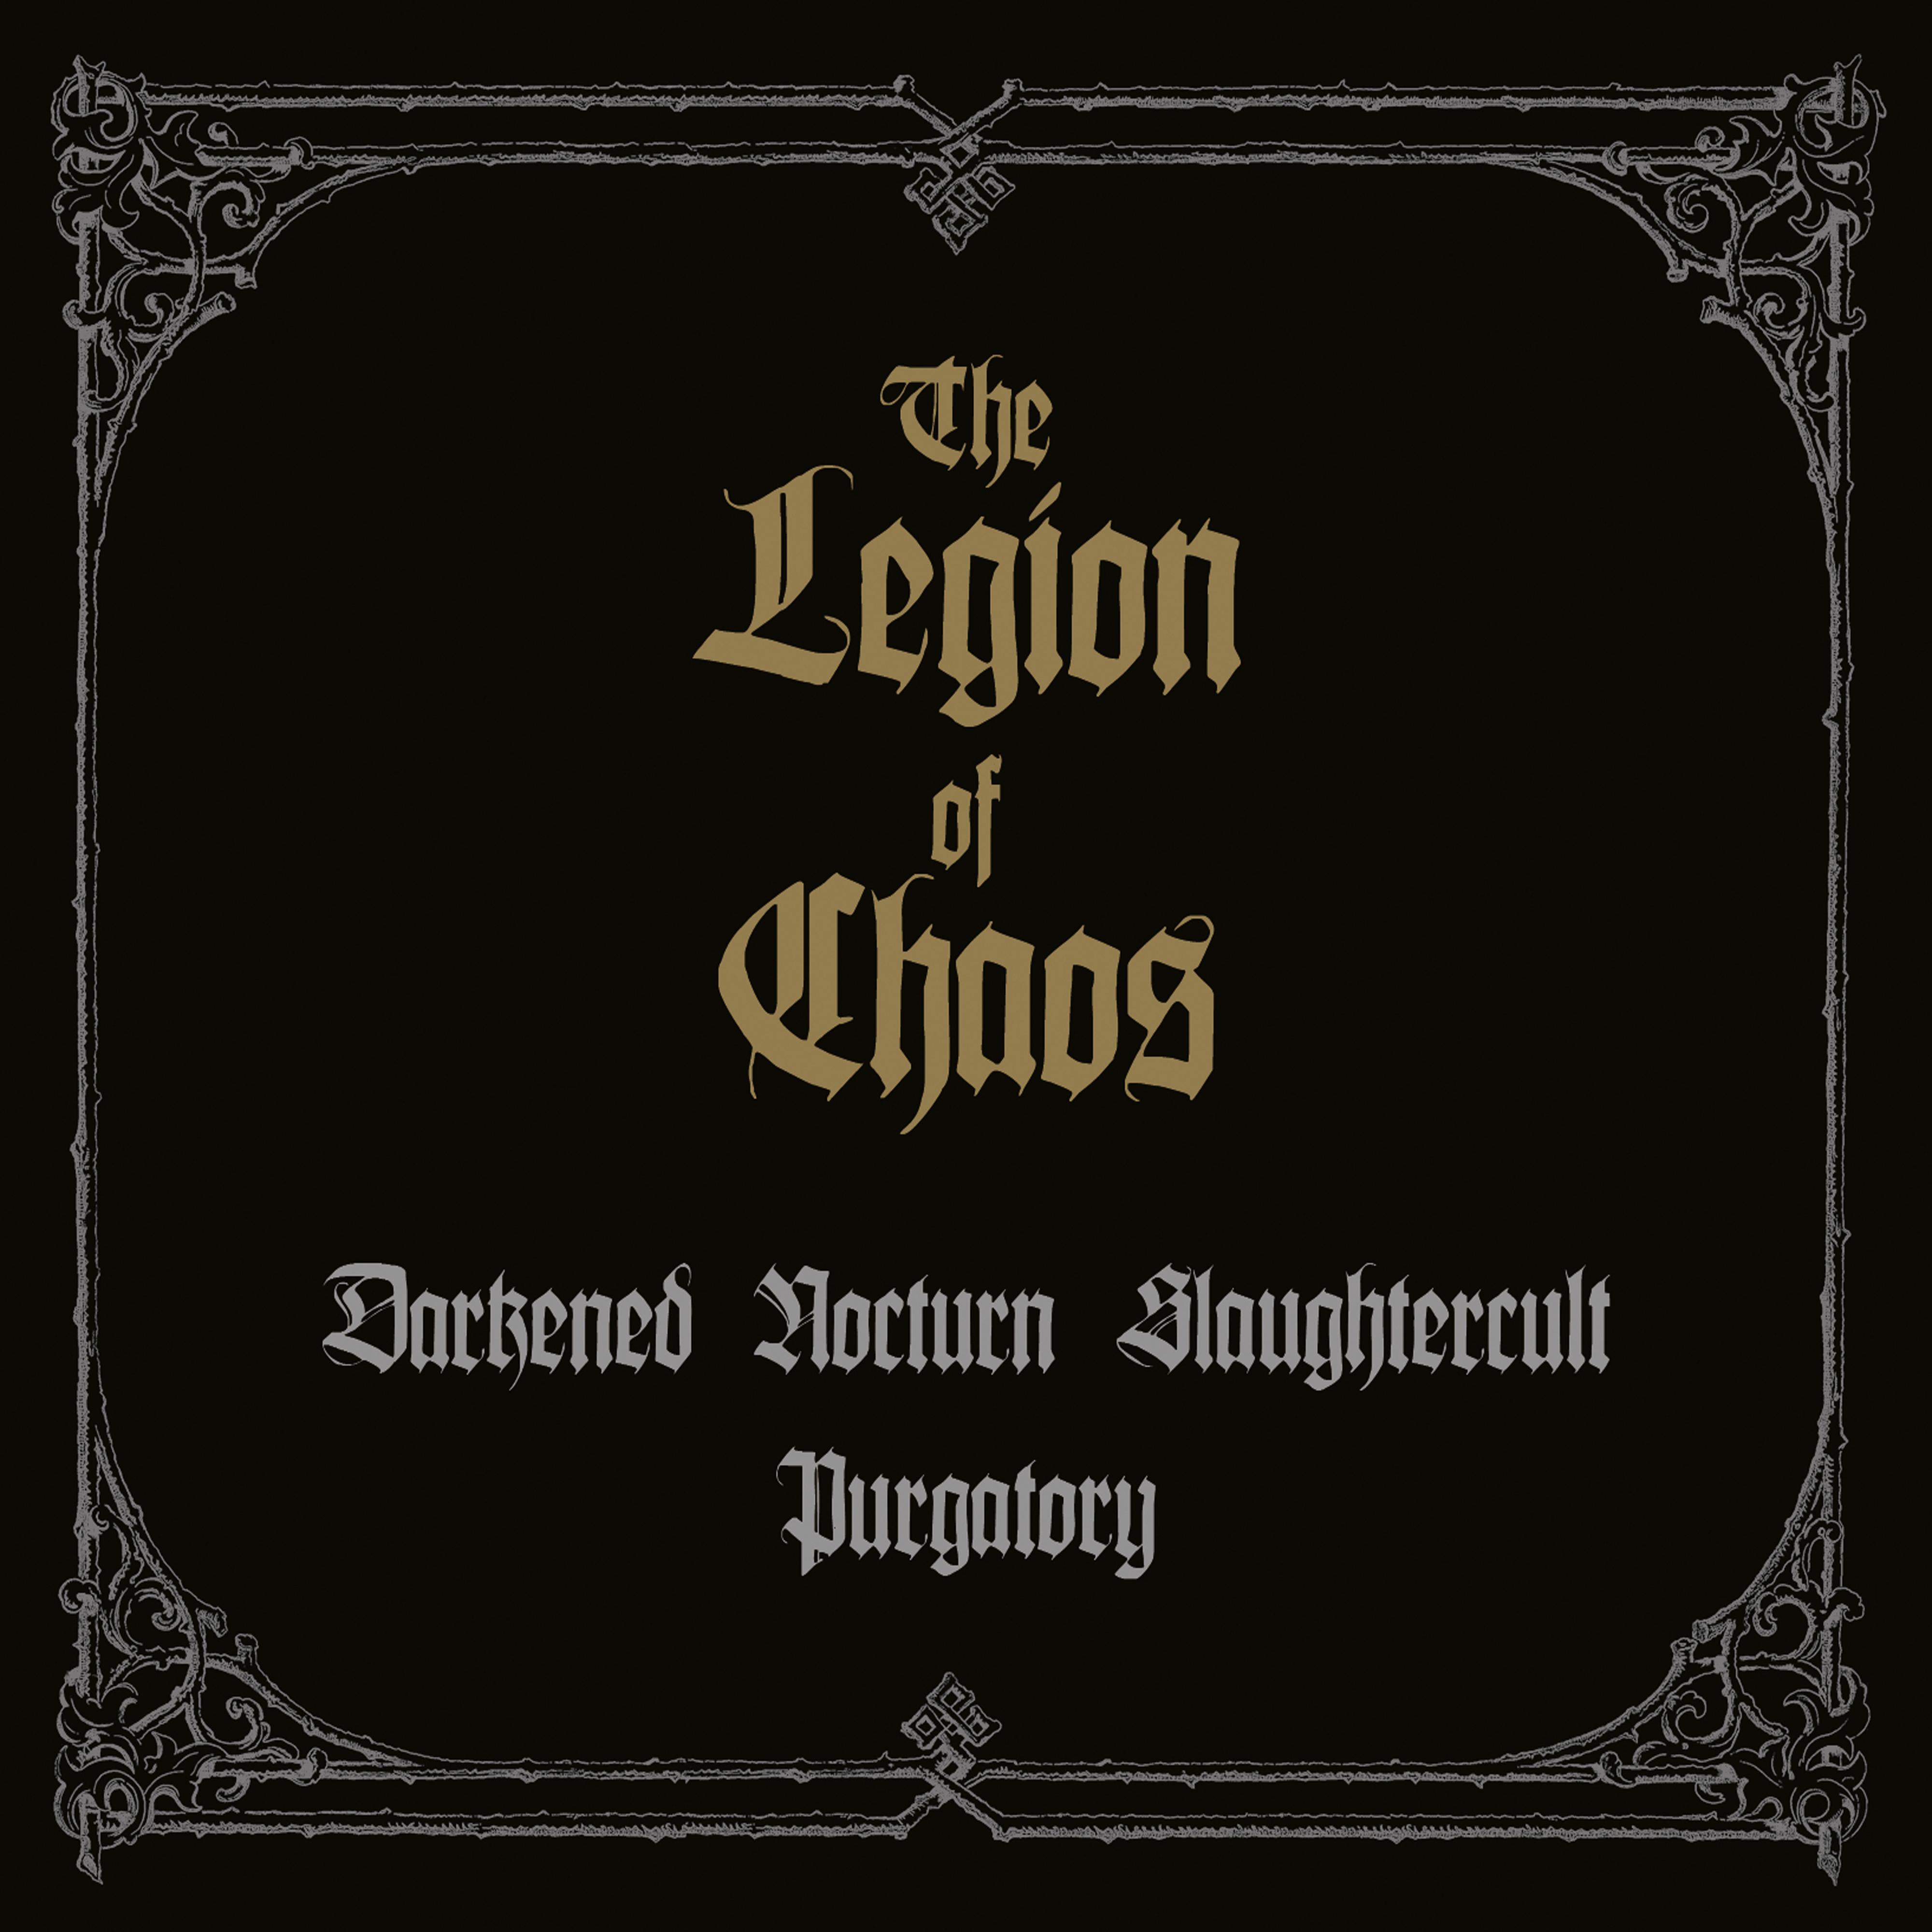 "The Legion of Chaos"